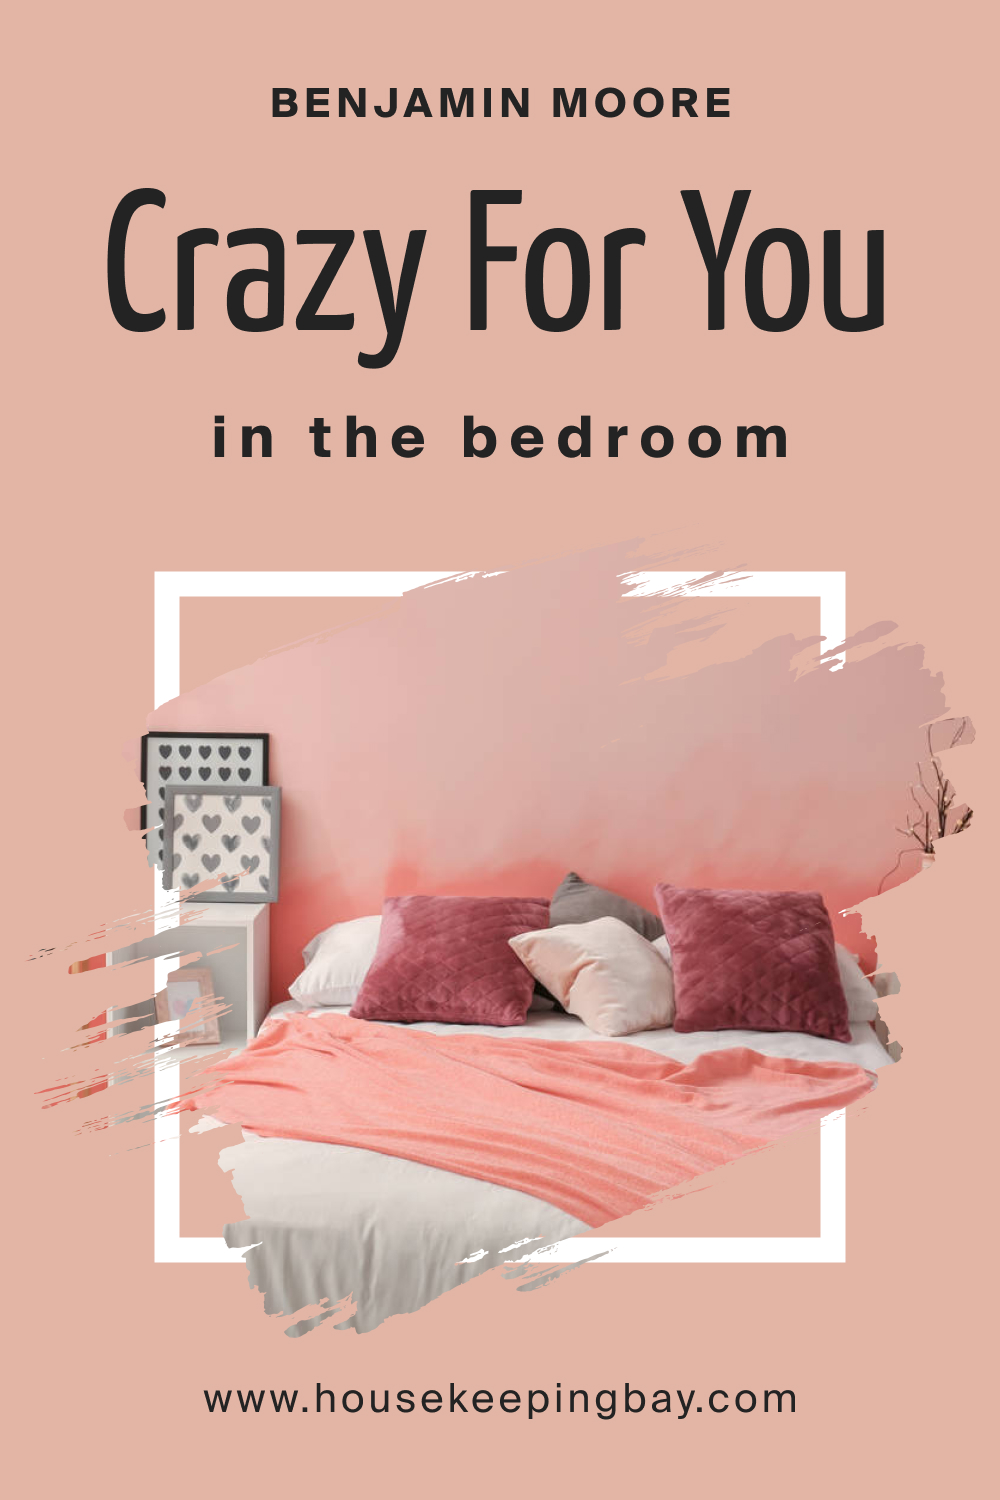 Benjamin Moore. BM Crazy For You 053 for the Bedroom